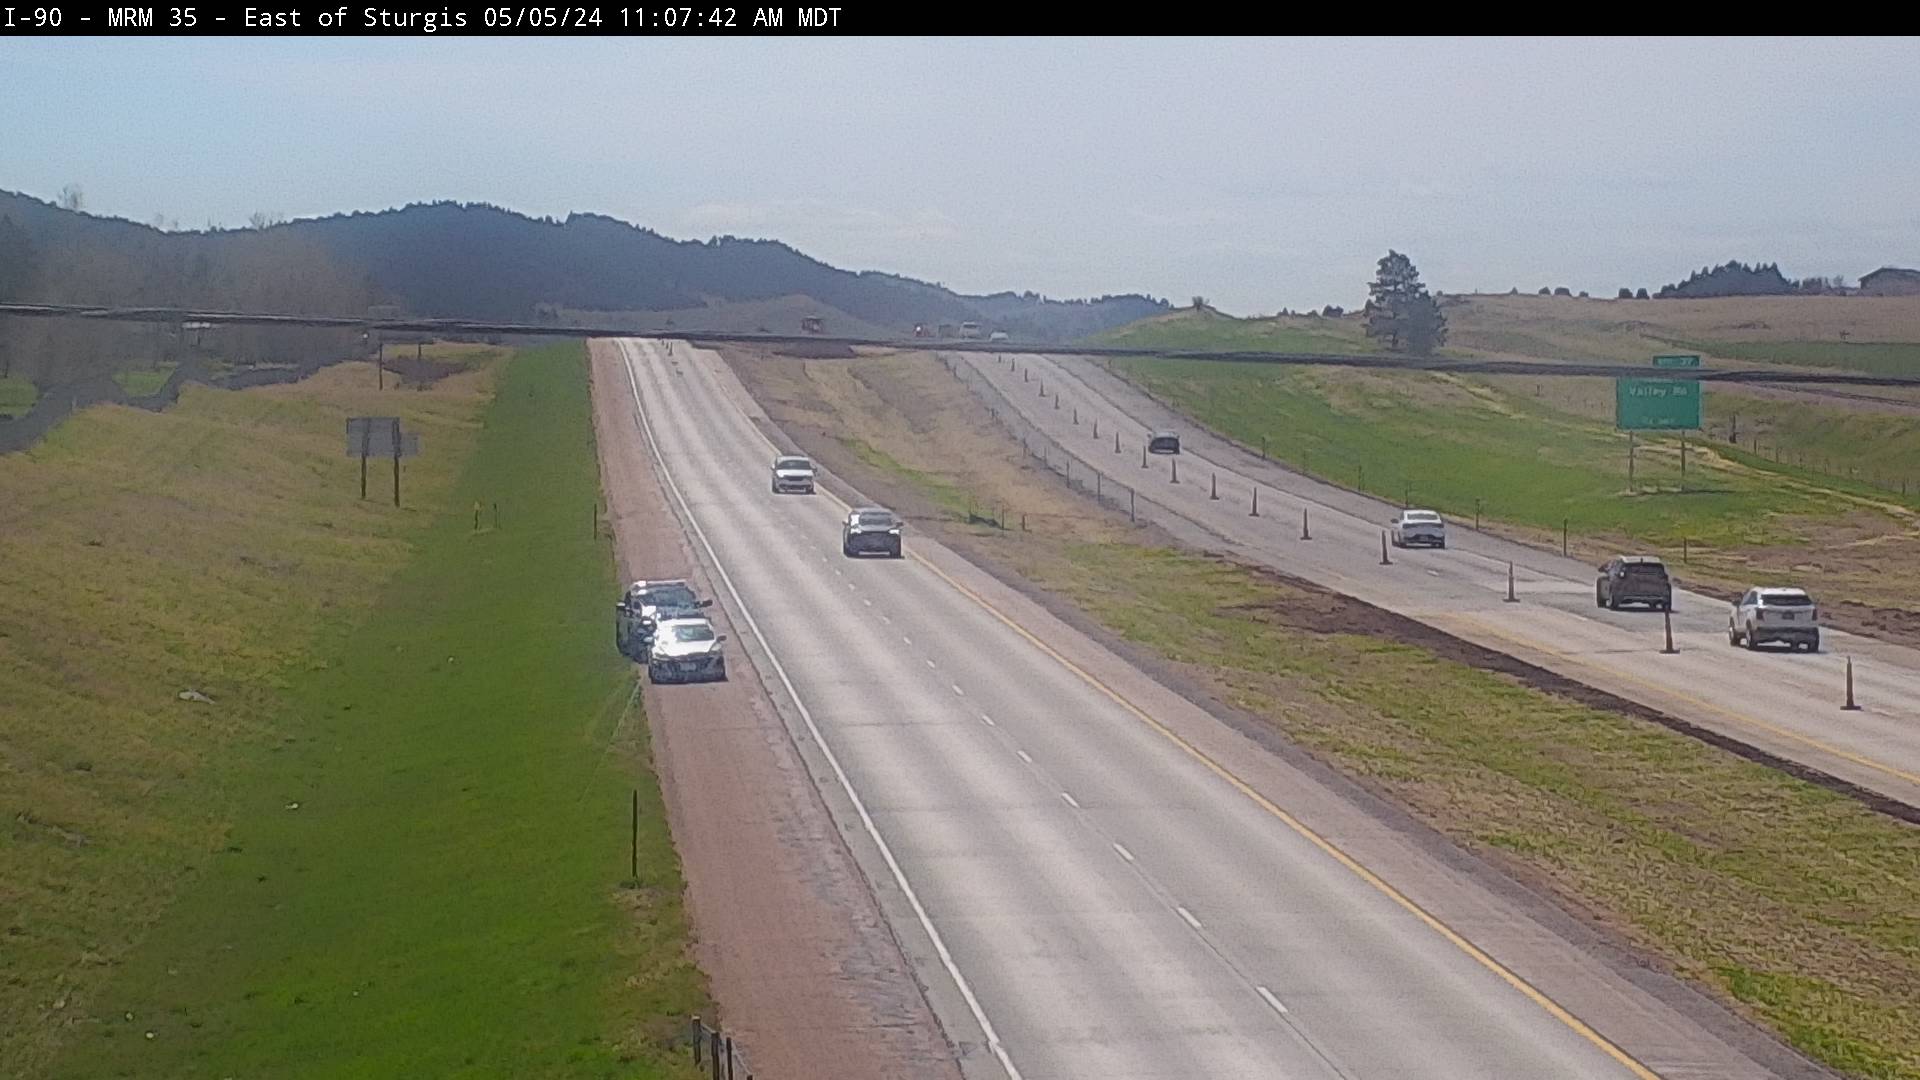 East of town along I-90 @ MP 35.6 - East Traffic Camera